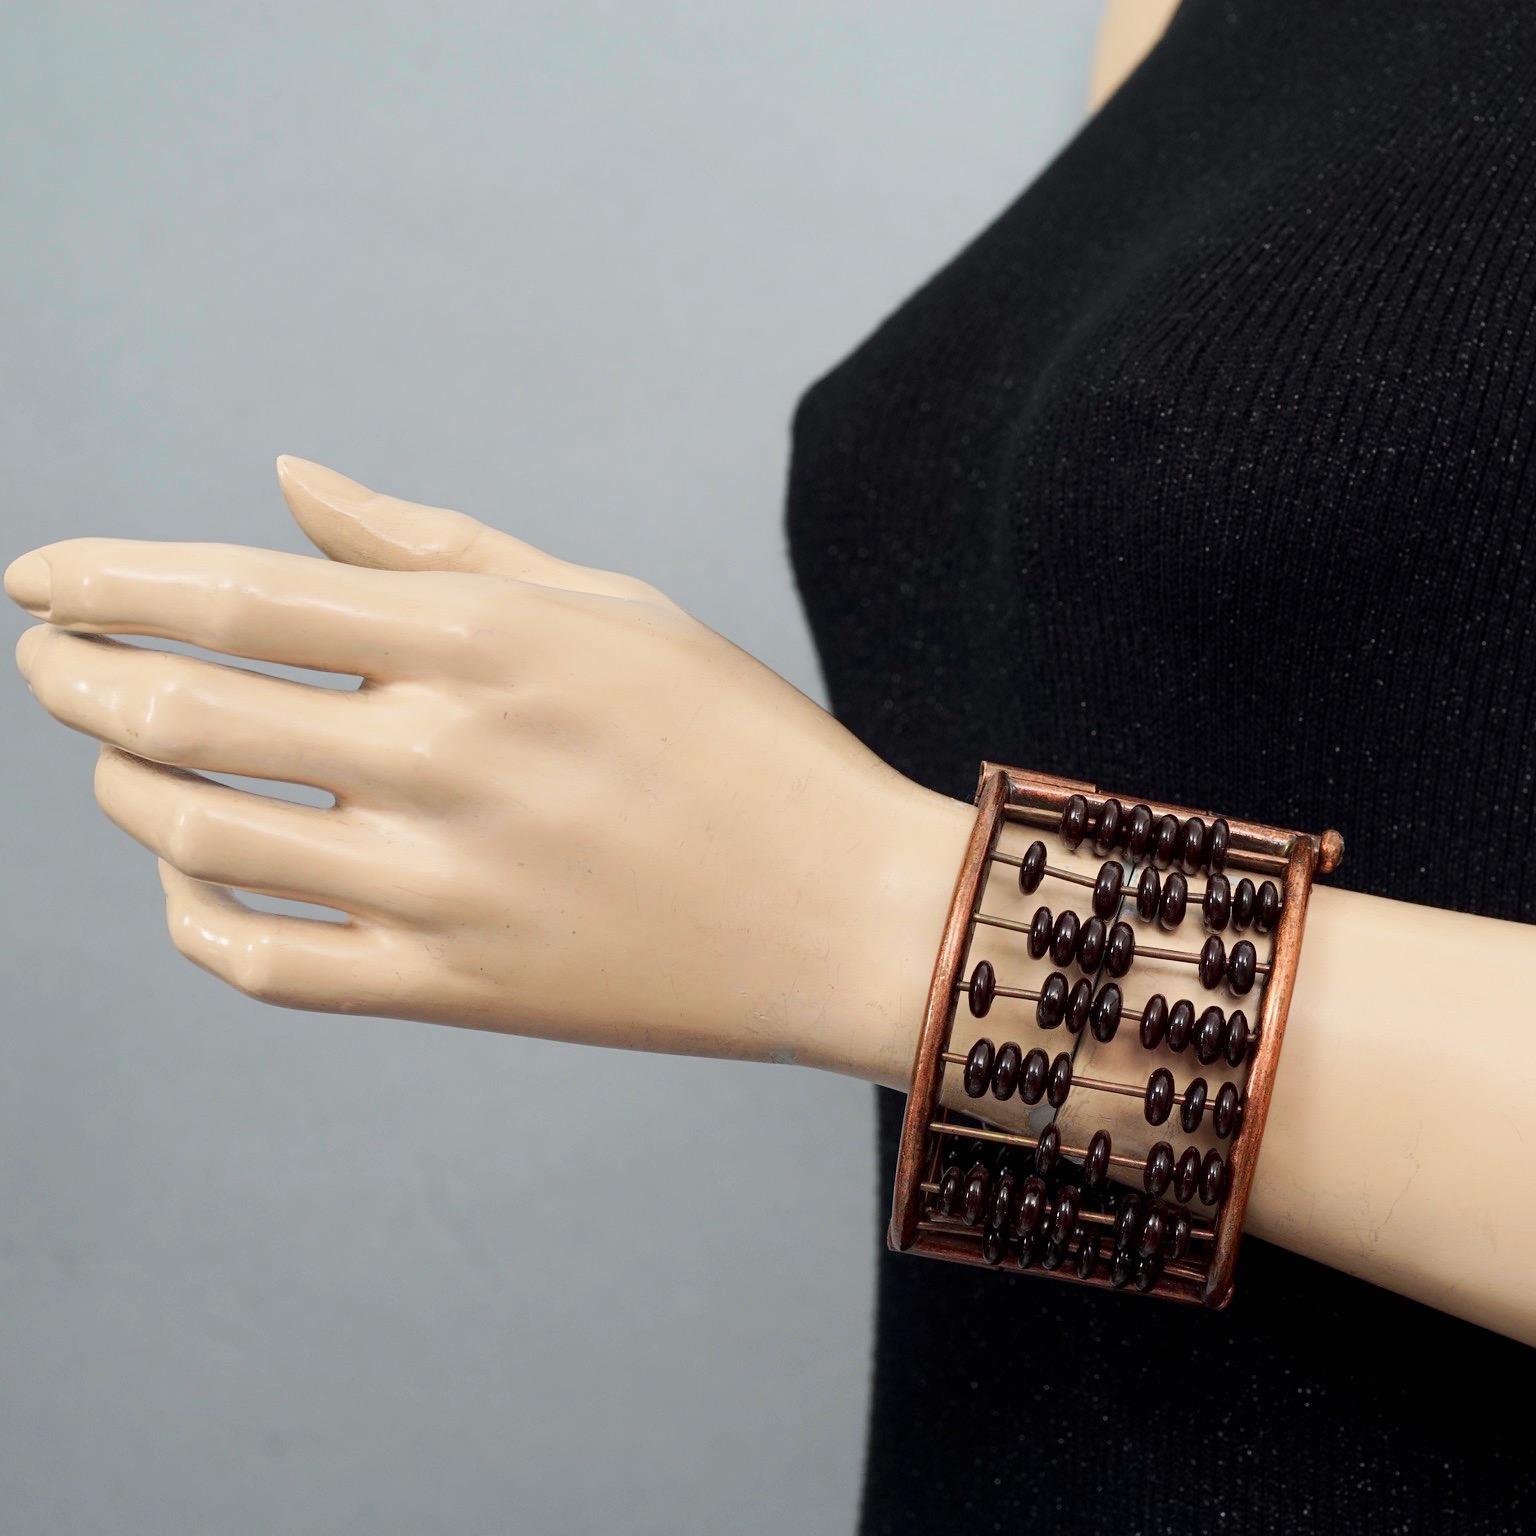 Vintage JEAN PAUL GAULTIER Abacus Cuff Bracelet

Measurements:
Height: 2.16 inches (5.5 cm)
Wearable Length: 7.28 inches (18.5 cm)

Features:
- 100% Authentic JEAN PAUL GAULTIER.
- Abacus style cuff bracelet with brown beads embellishment.
- Bronze